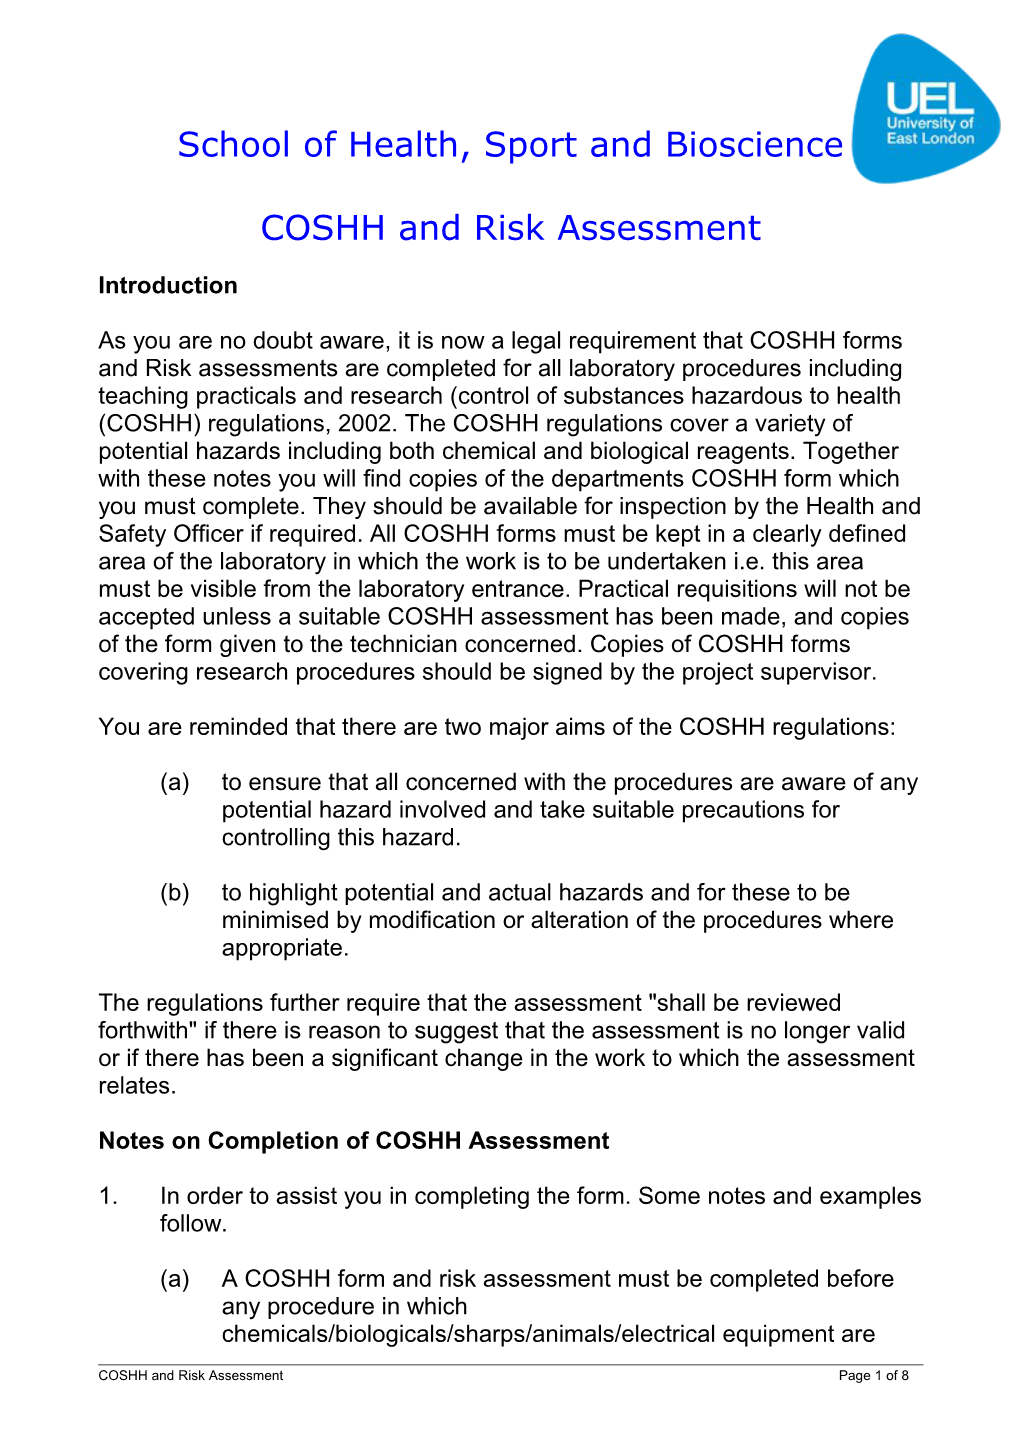 COSHH and RISK ASSESSMENT